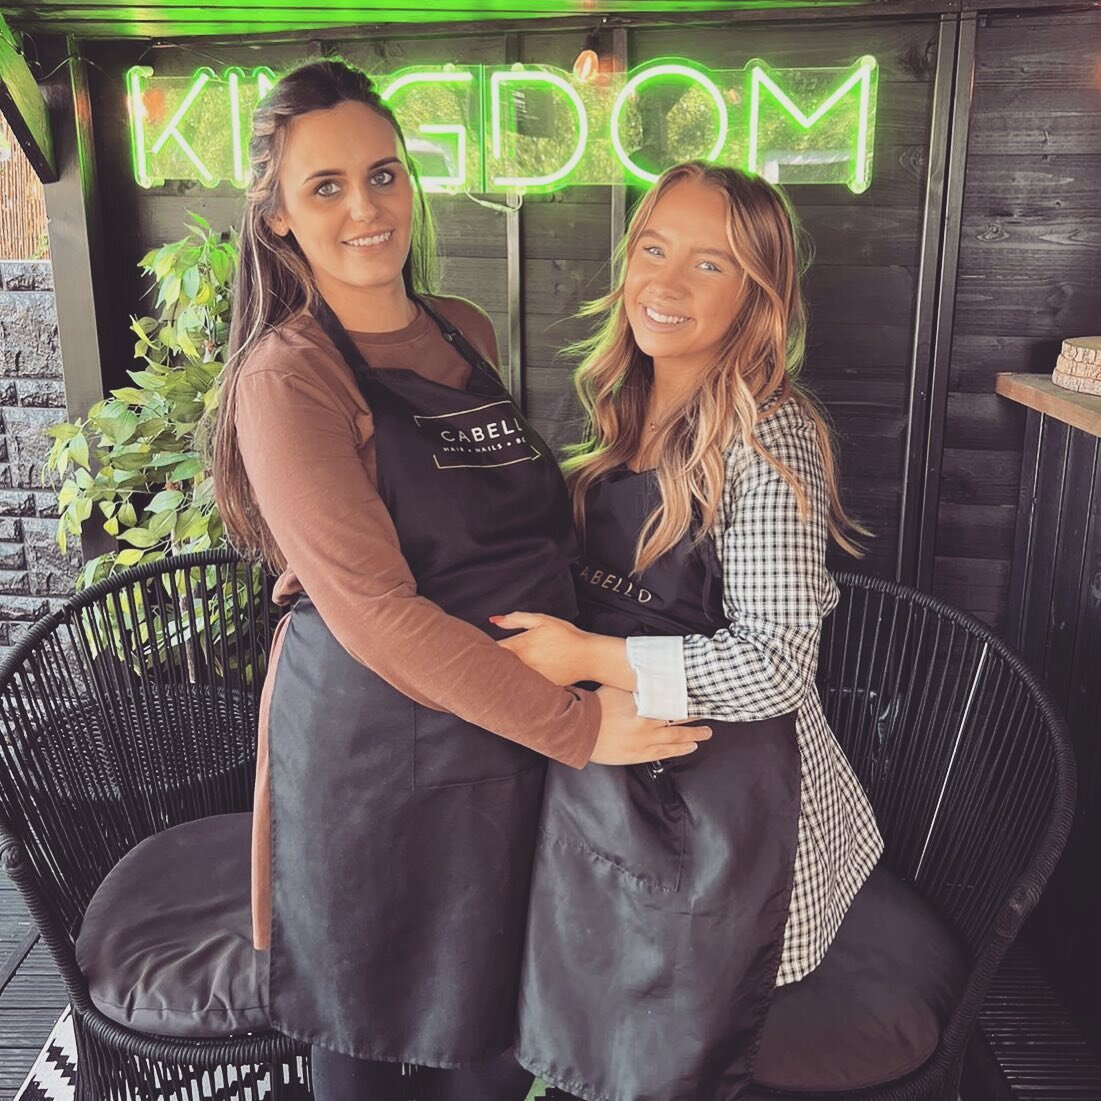 Not long to go until these two beautiful mama&rsquo;s to be embark on their new adventure 👶🏻👶🏼

Maire is finishing up for maternity leave on May 20th, and Jade follows on May 22nd.

Wishing them both all the happy, healthy exciting times ahead 🤩